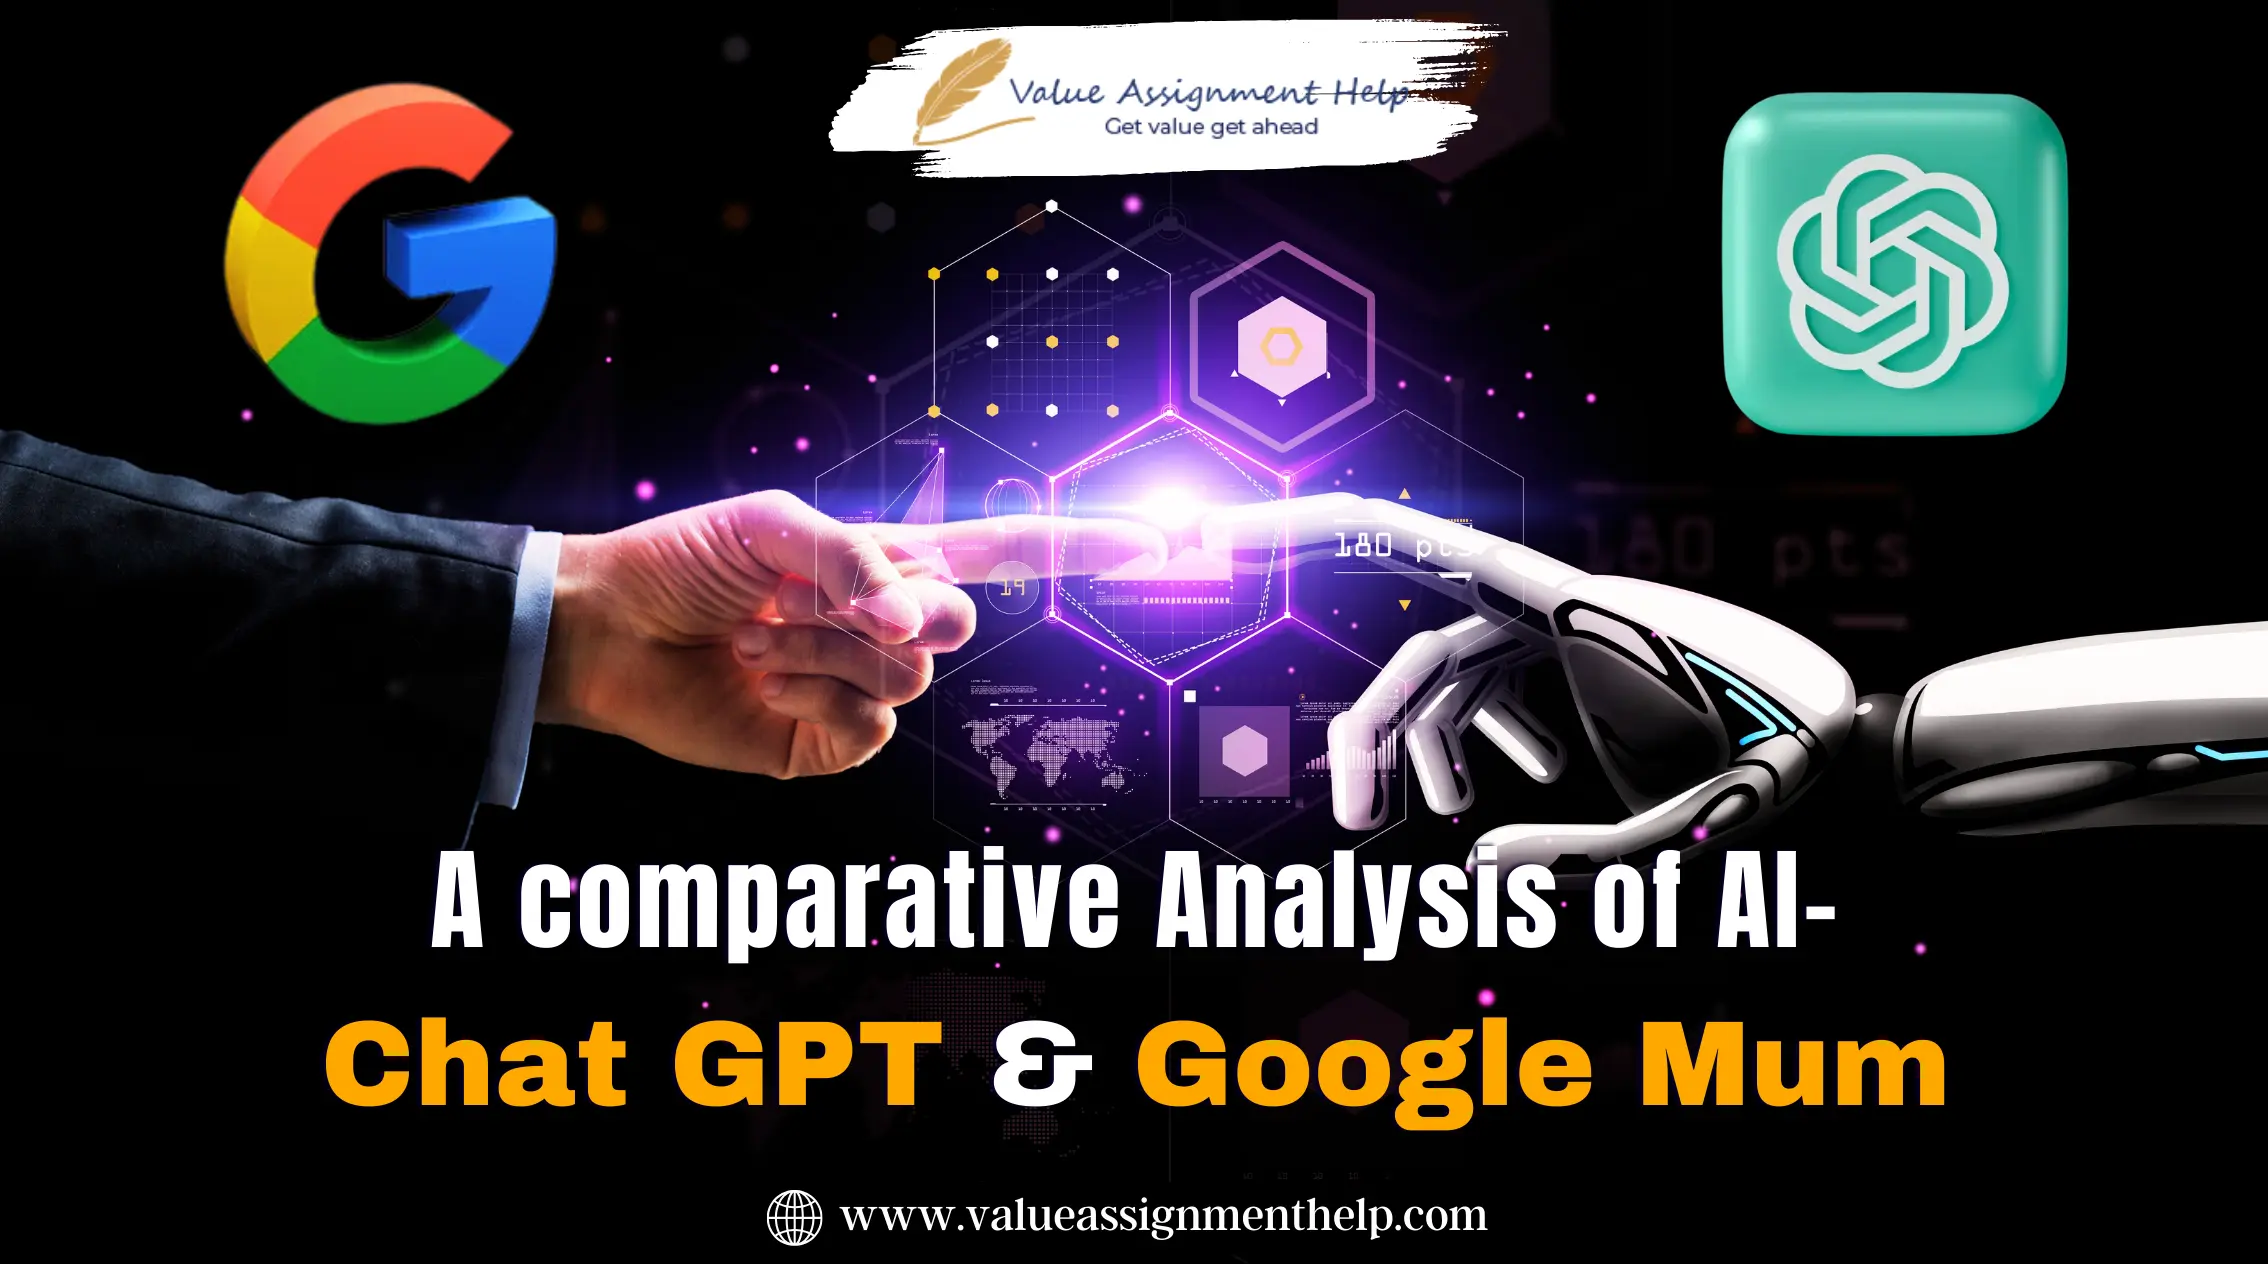  A comparative analysis of AI- chat gpt & Google Mum